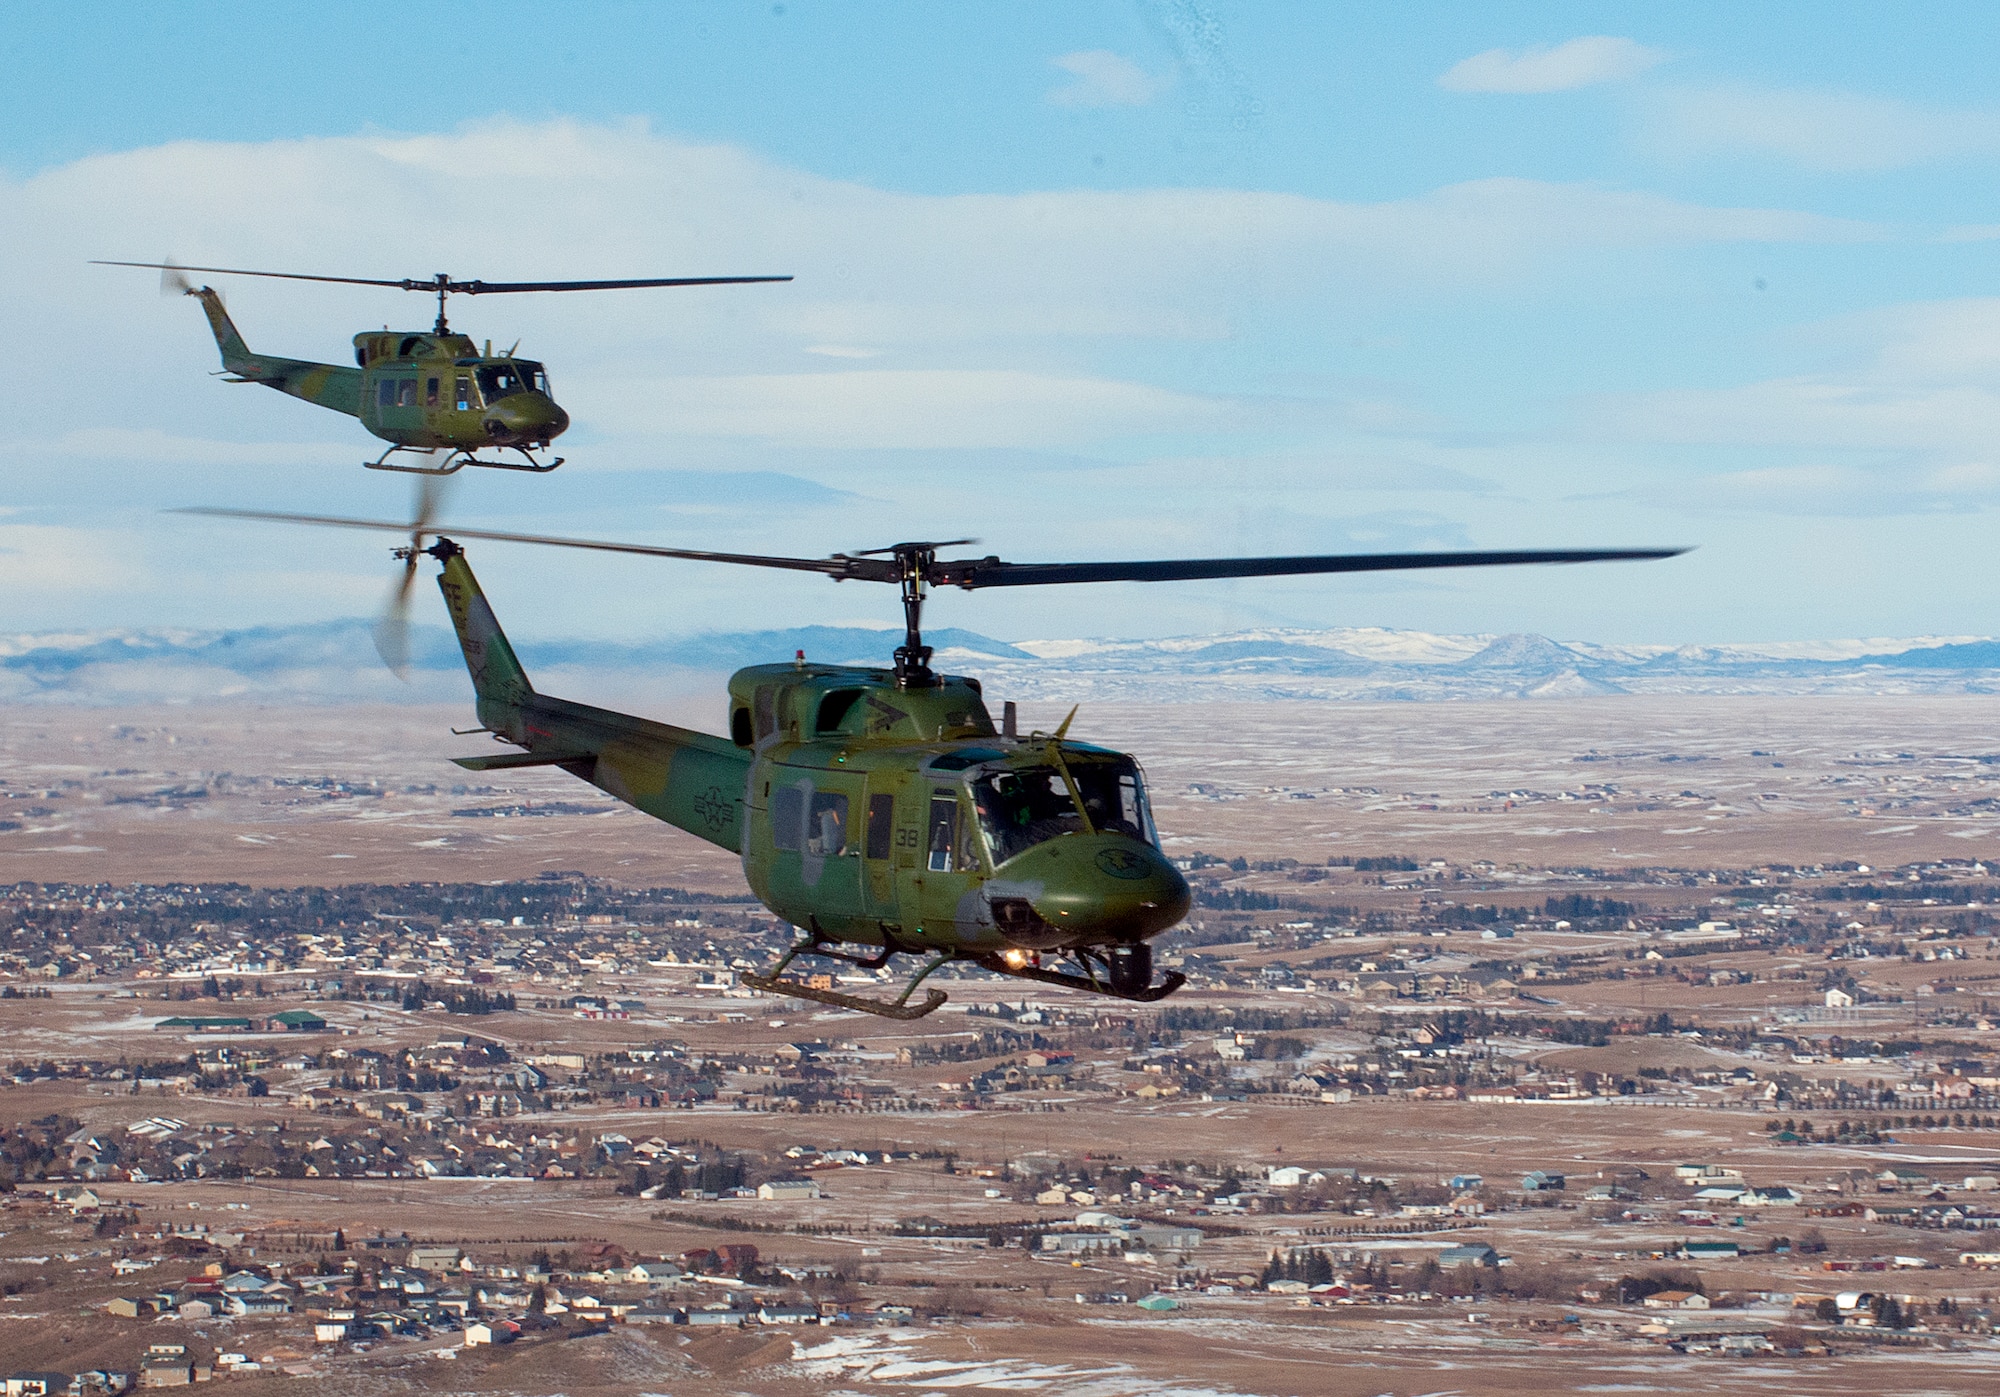 Two UH-1N helicopters from the 37th Helicopter fly in formation Jan 9, 2014, over Cheyenne, Wyo. The newly-formed 20th Air Force helicopter operations group set up at F.E. Warren Air Force Base Aug. 1, 2014. The group assumes control of the helicopter squadrons across 20th Air Force sometime in 2015 after it ends its provisional status. (Courtesy photo)